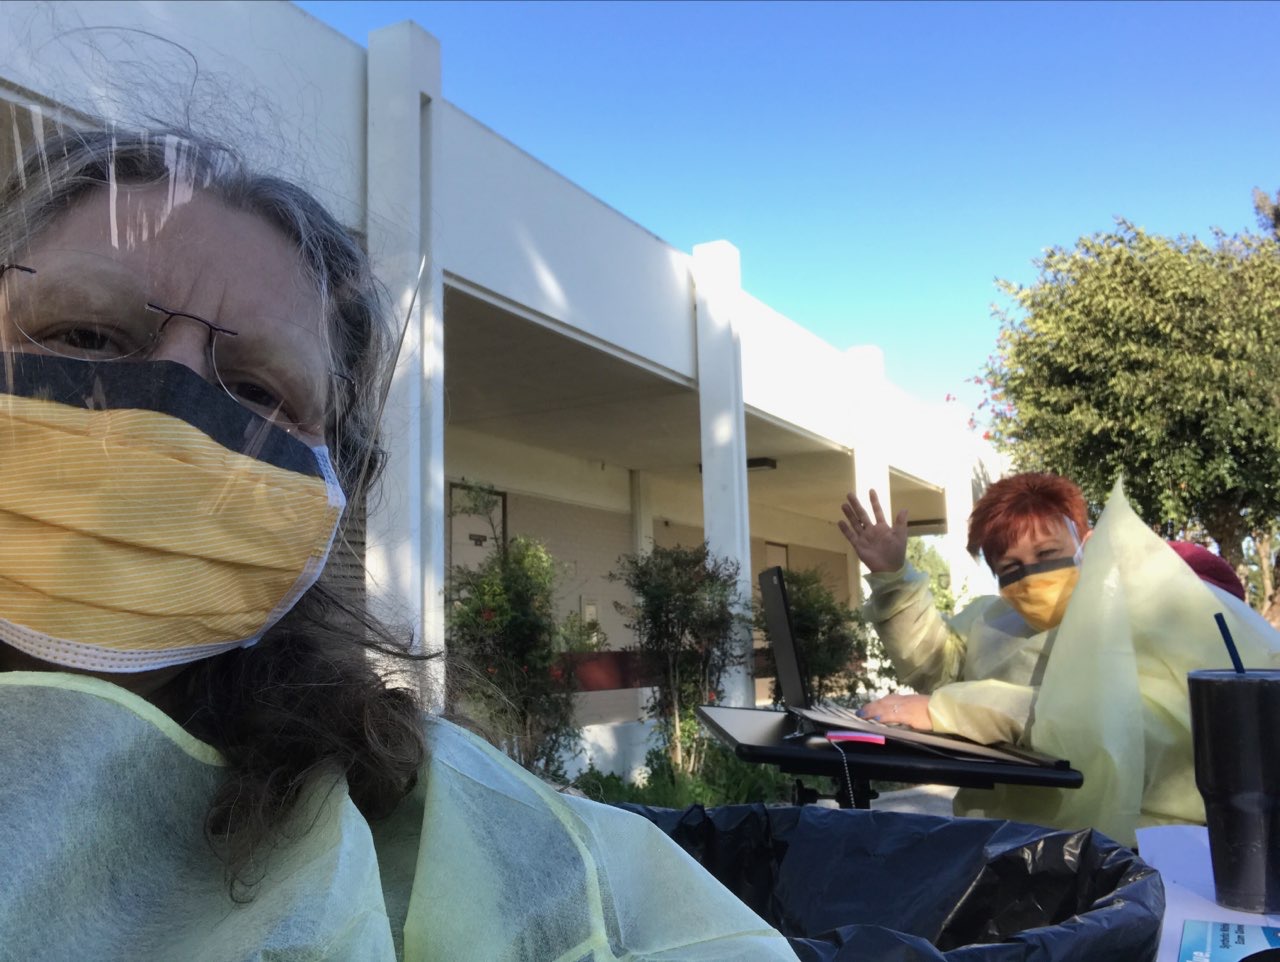 Student health center personnel suited up in personal protective equipment (PPE) and providing care for students during Covid-19 pandemic